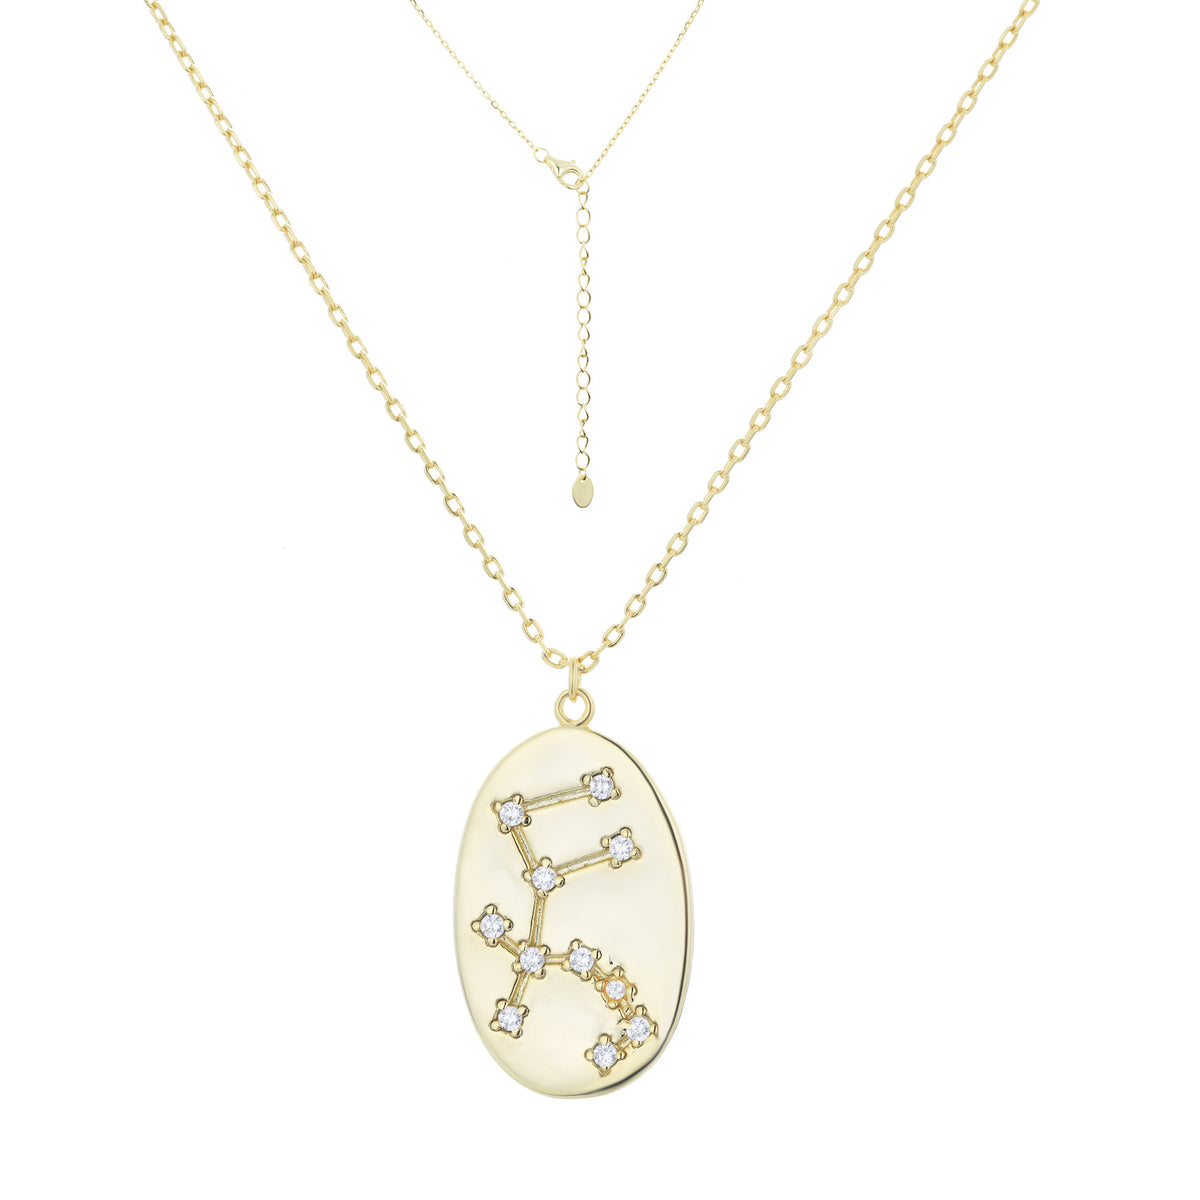 AQUARIUS - ΥΔΡΟΧΟΟΣ Pendant | White CZ | 18K Gold Plated 925 Silver